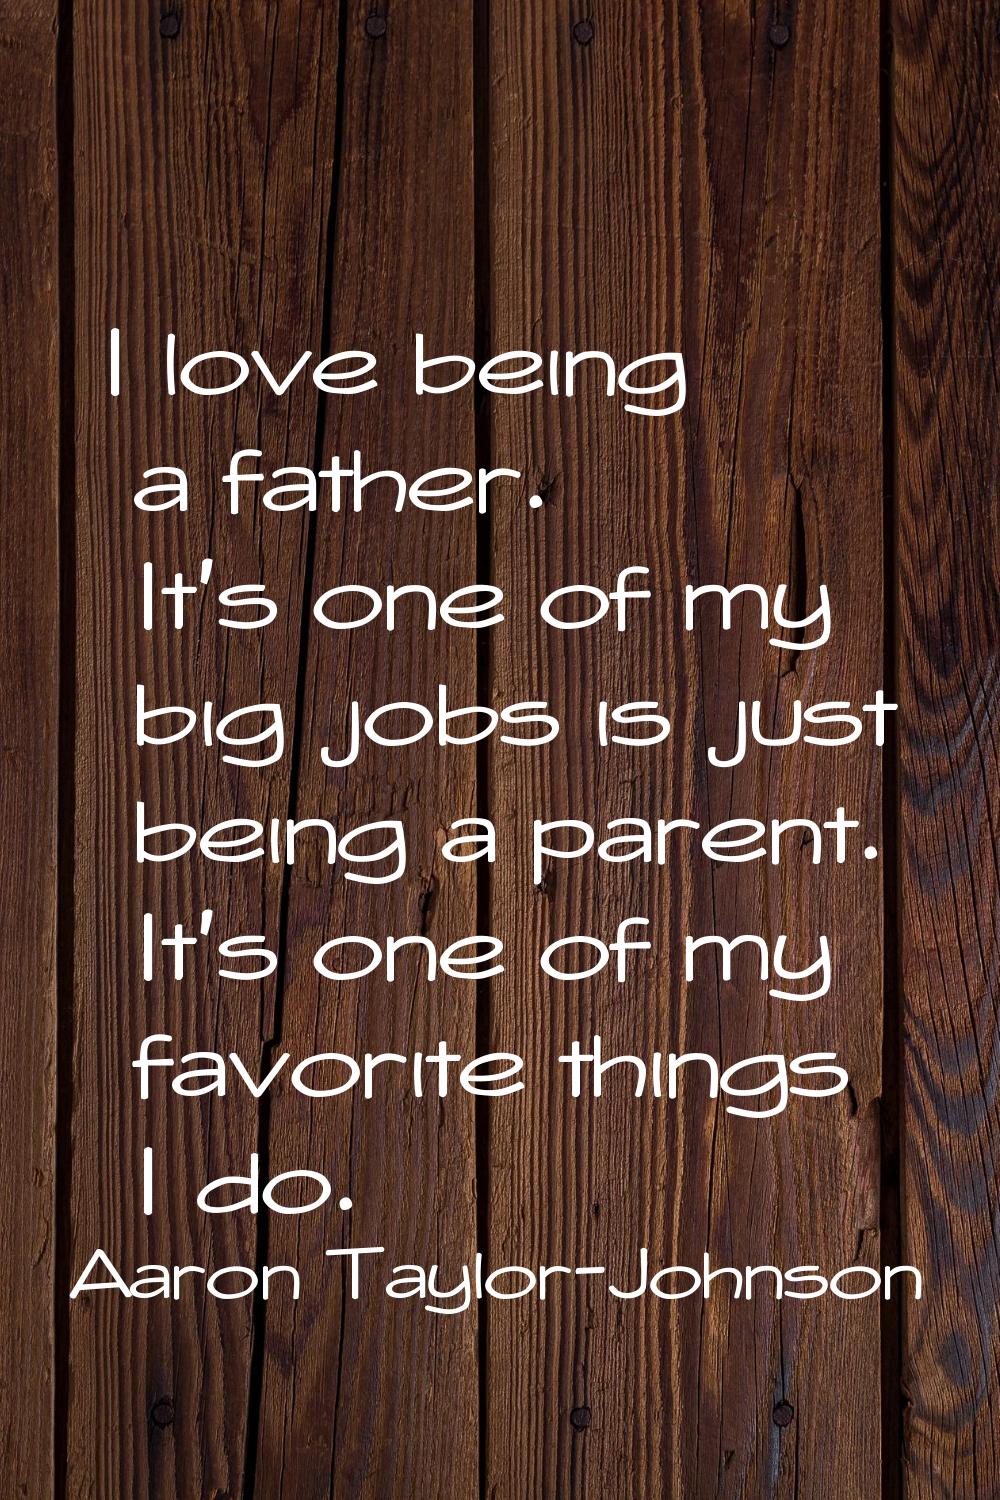 I love being a father. It's one of my big jobs is just being a parent. It's one of my favorite thin